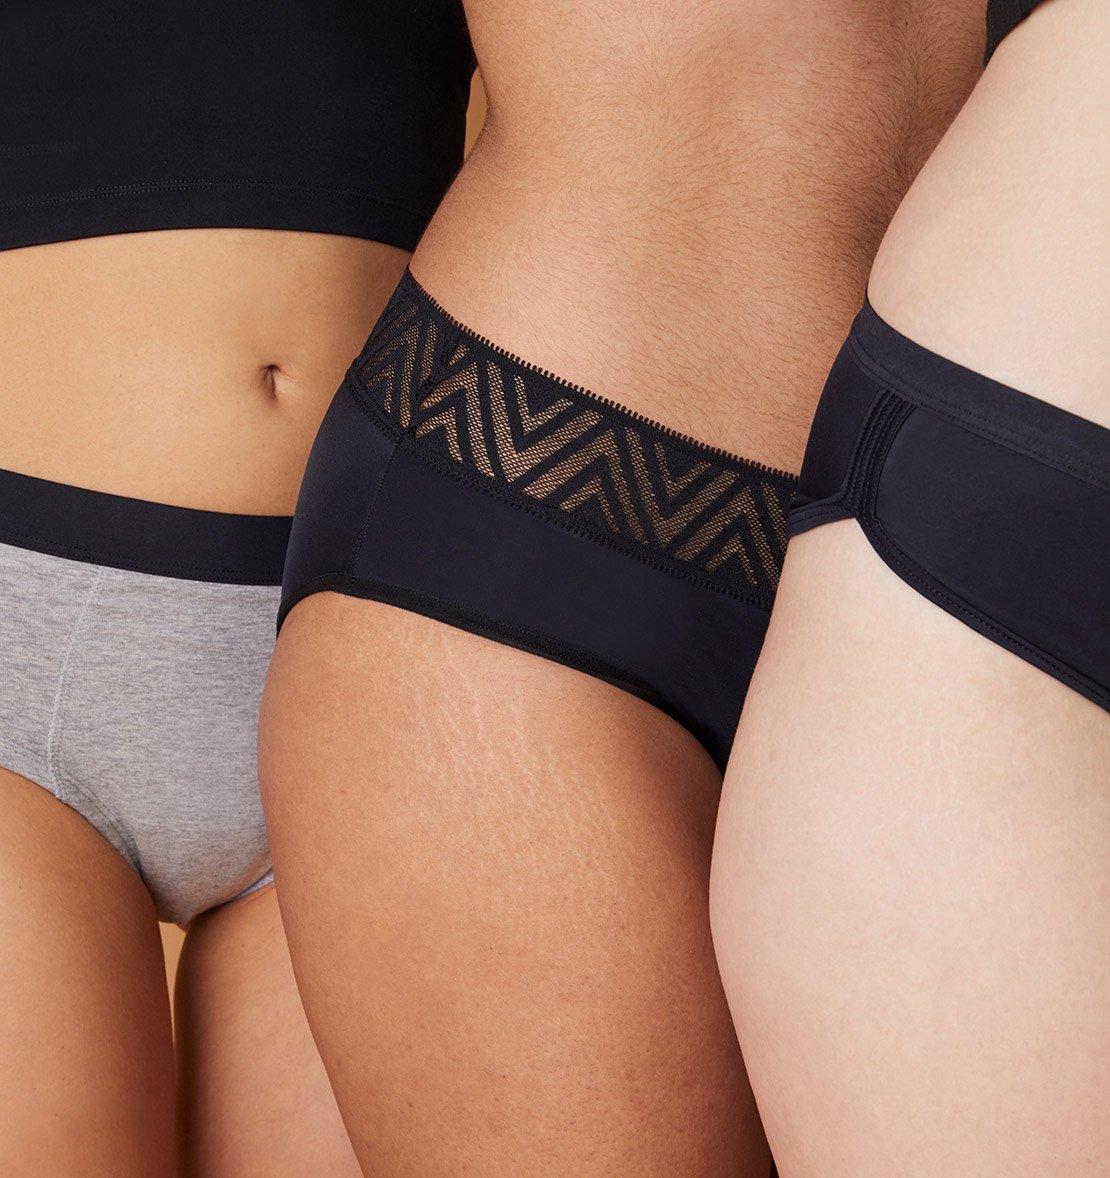 32 Things You Need If You Hate Pants